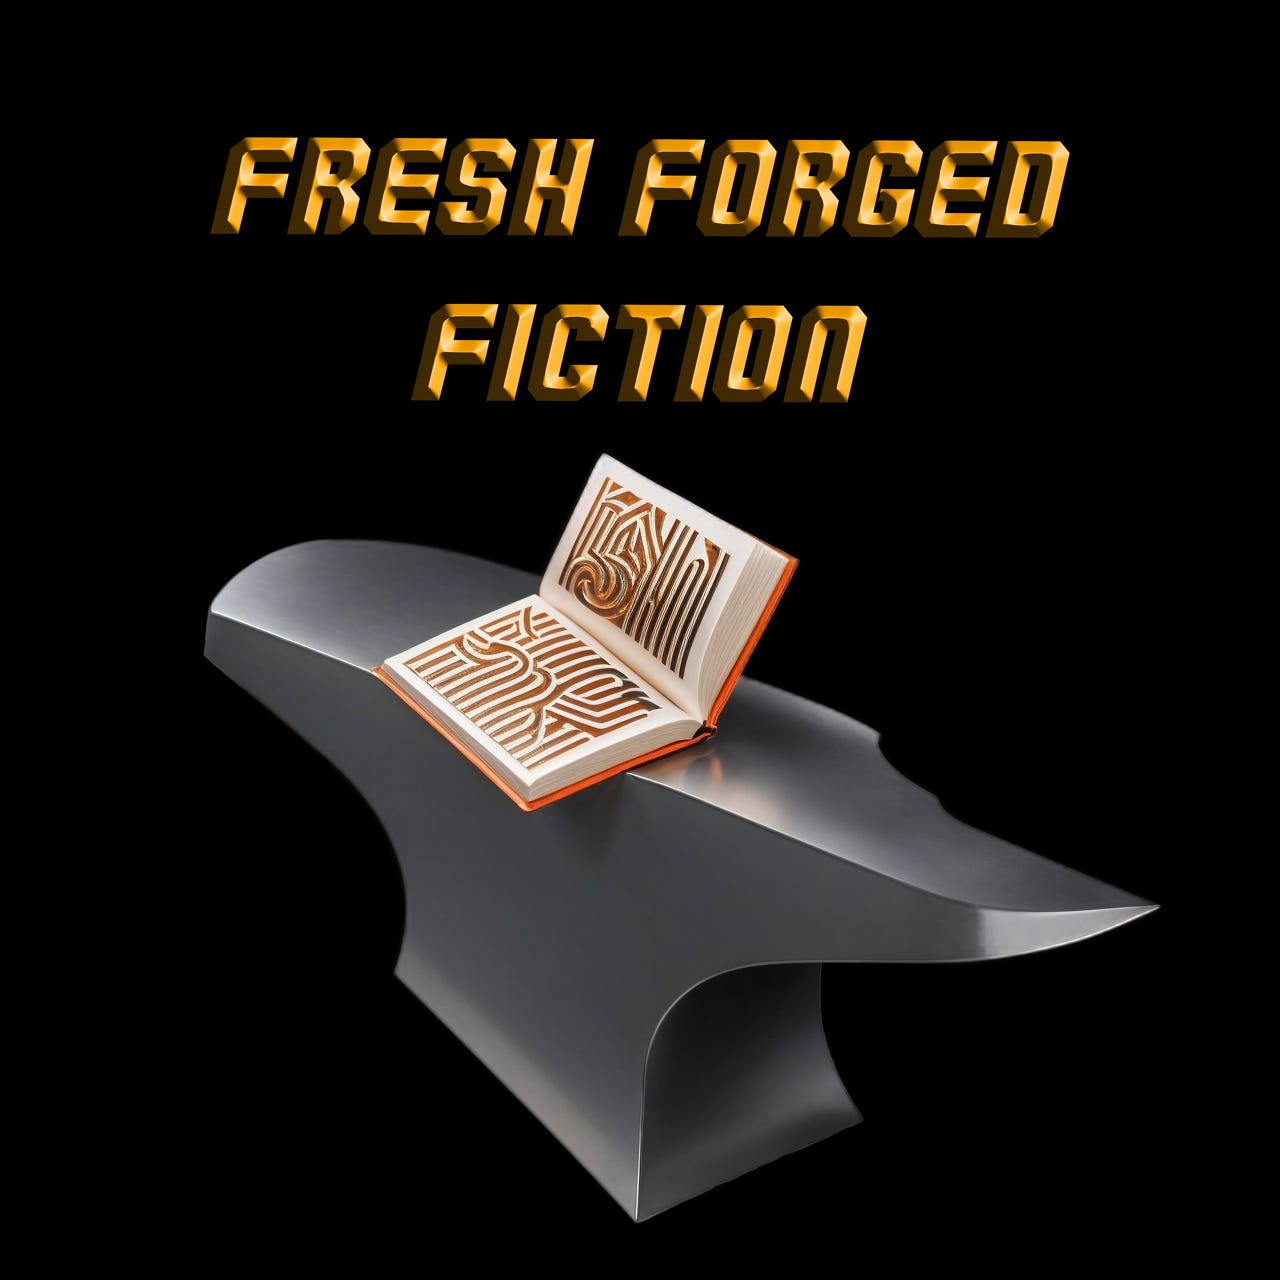 Artwork for Fresh Forged Fiction